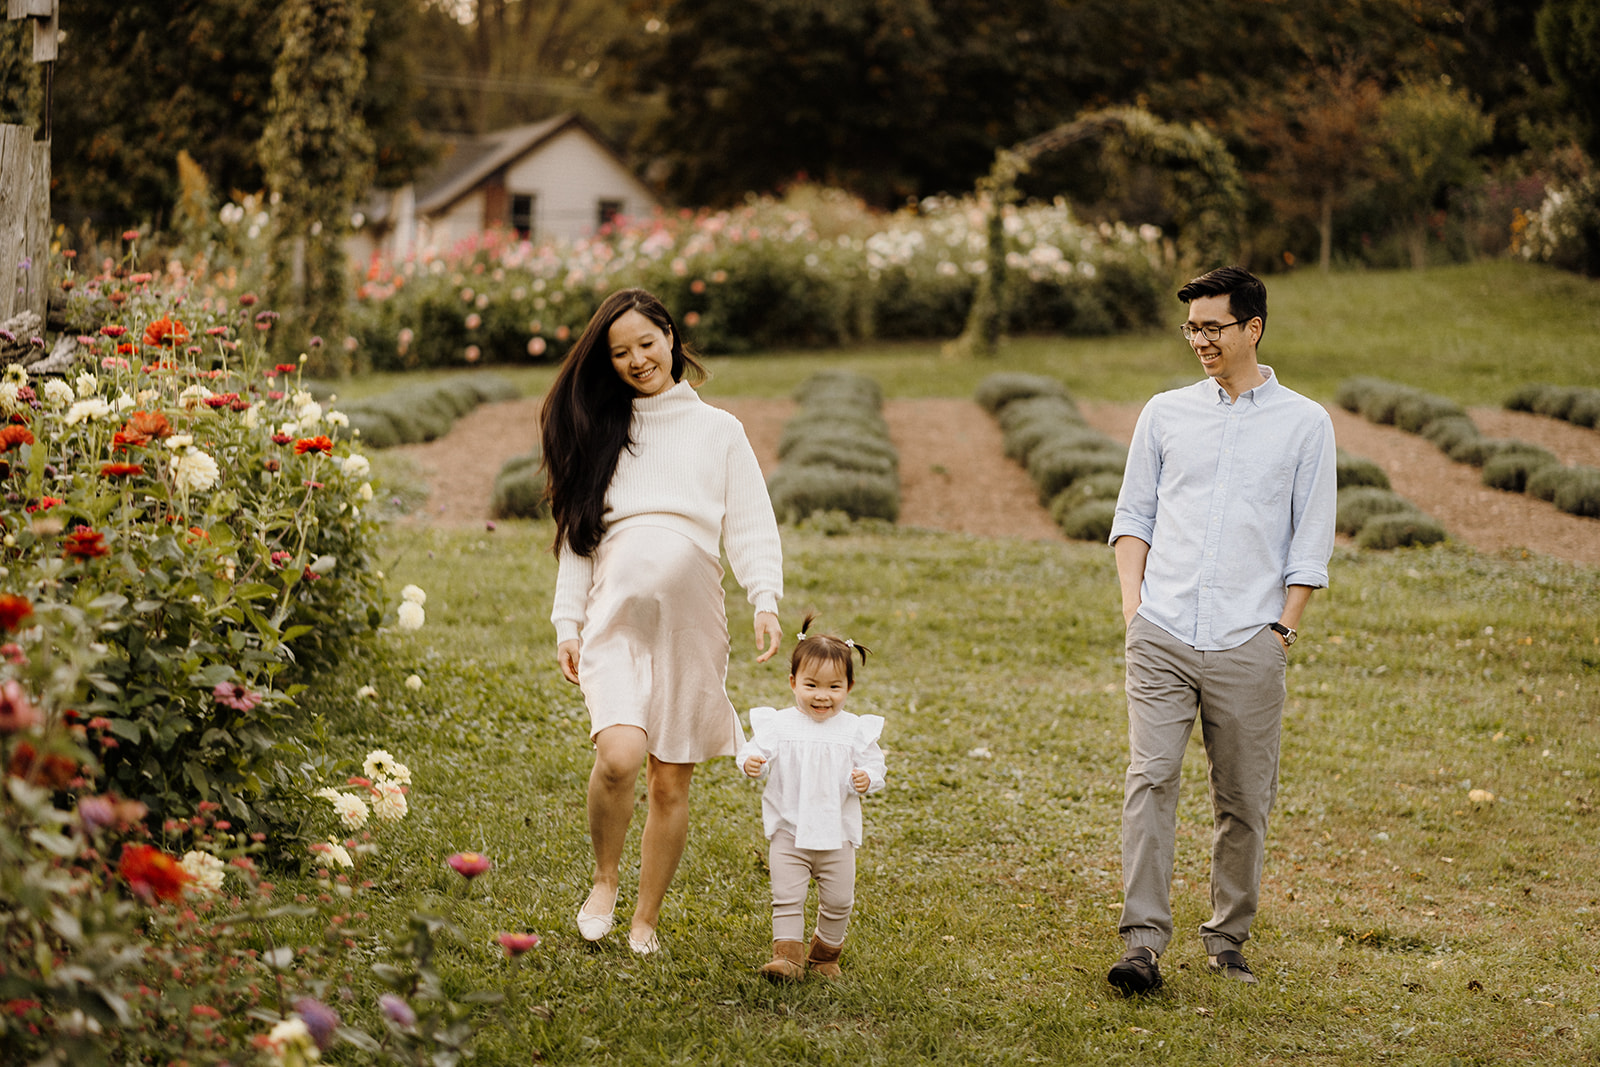 A family of three walking by the flowers.